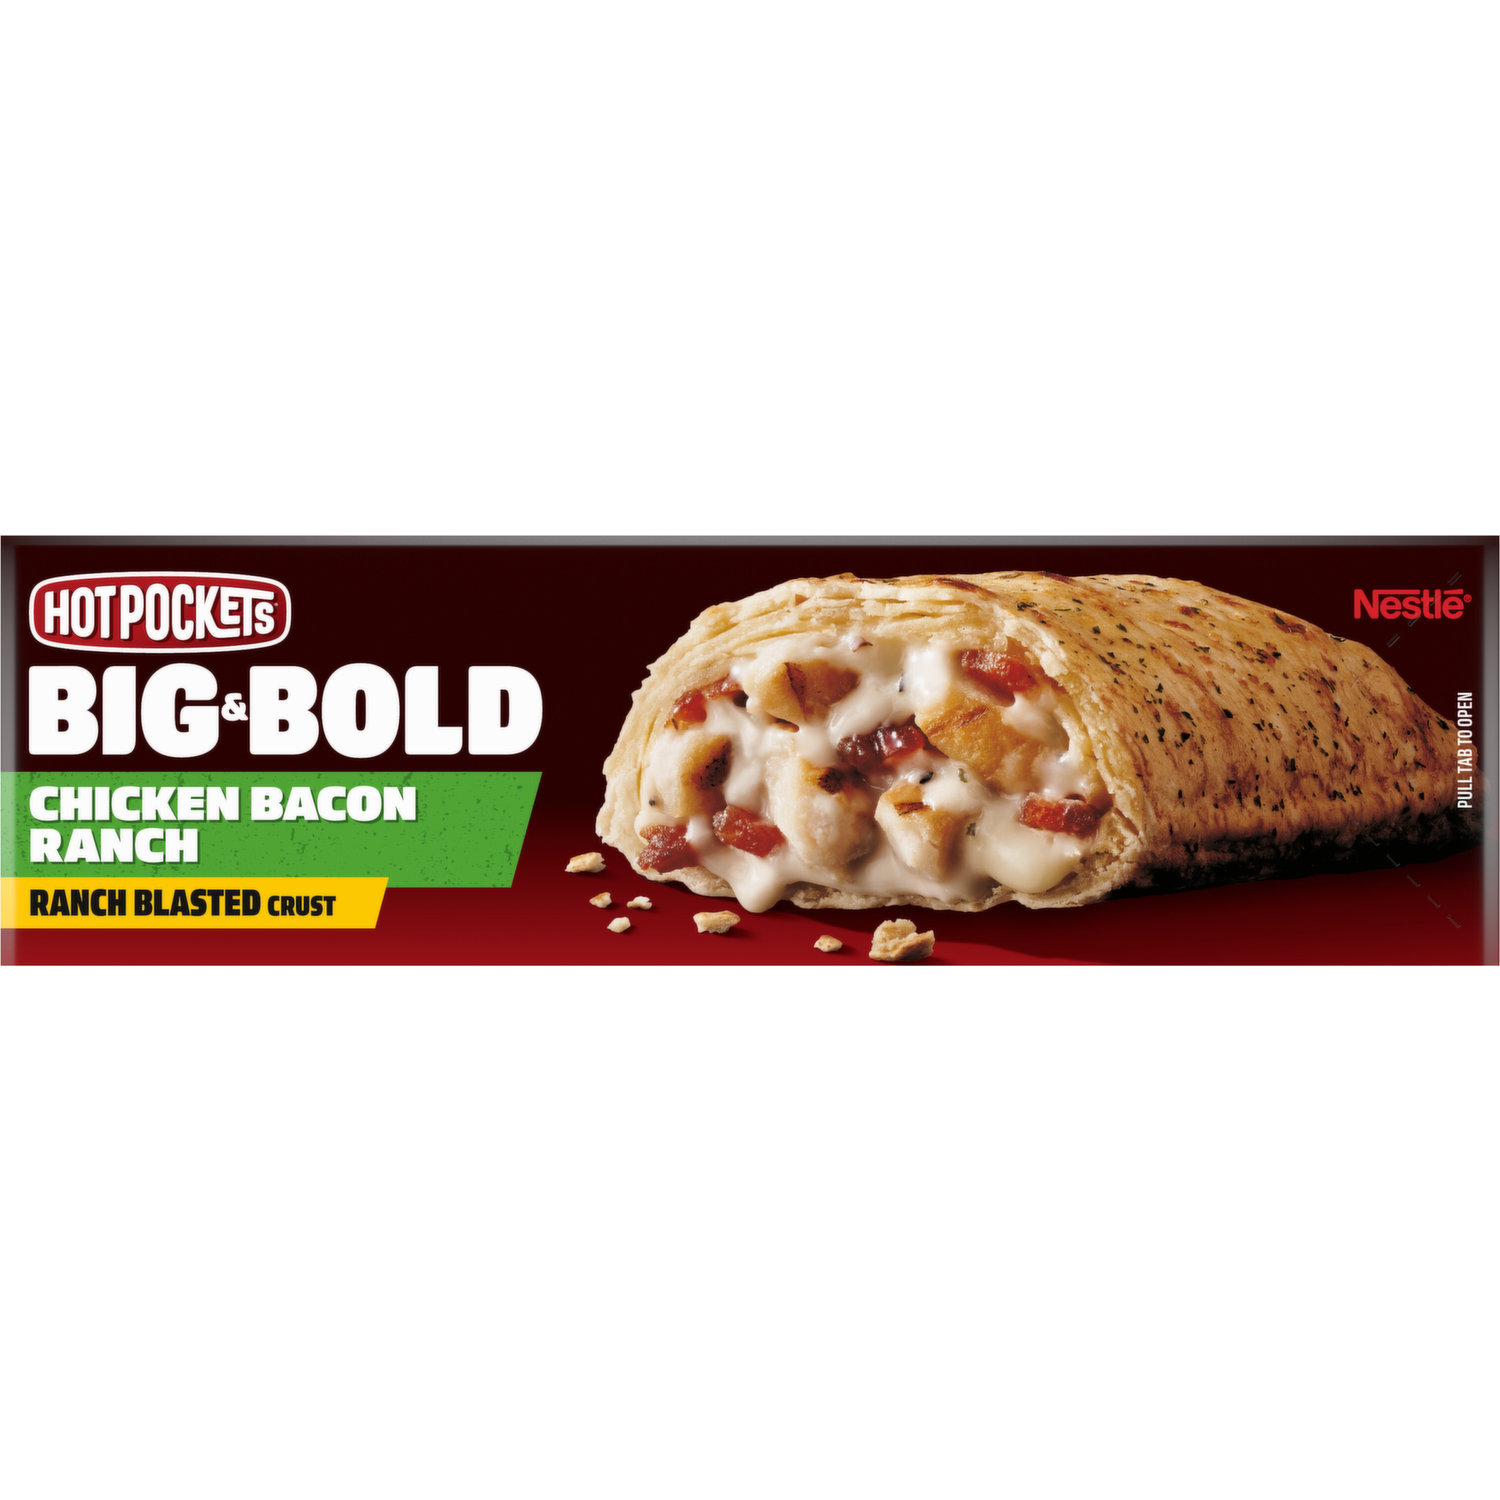 HOT POCKETS BIG & BOLD Chicken Bacon Ranch Frozen Sandwich 2 ct Pack, Appetizers & Snacks